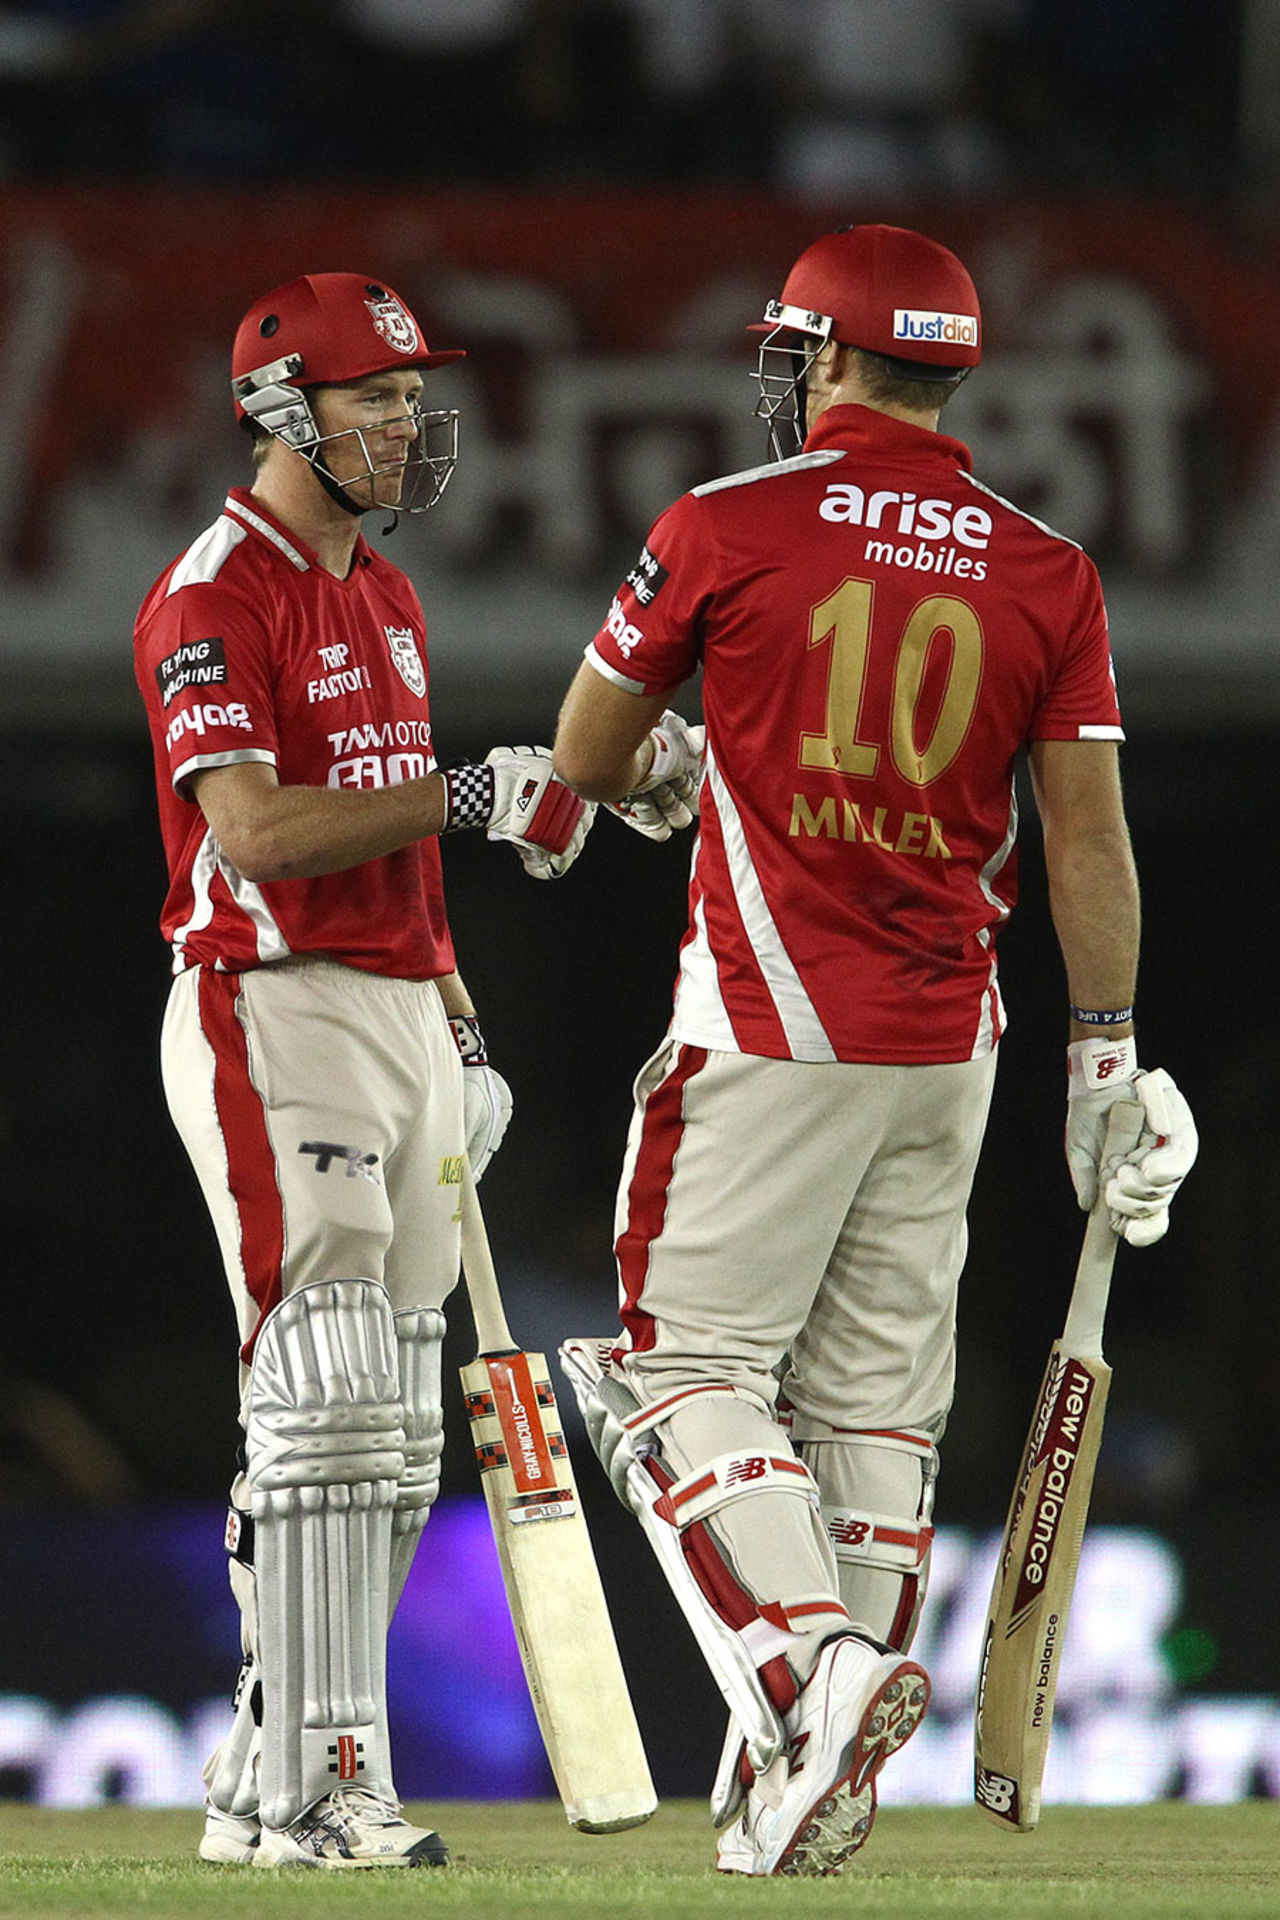 George Bailey and David Miller put on an unbroken 60-run partnership for the fifth wicket, Kings XI Punjab v Rajasthan Royals, IPL 2014, Mohali, May 23, 2014